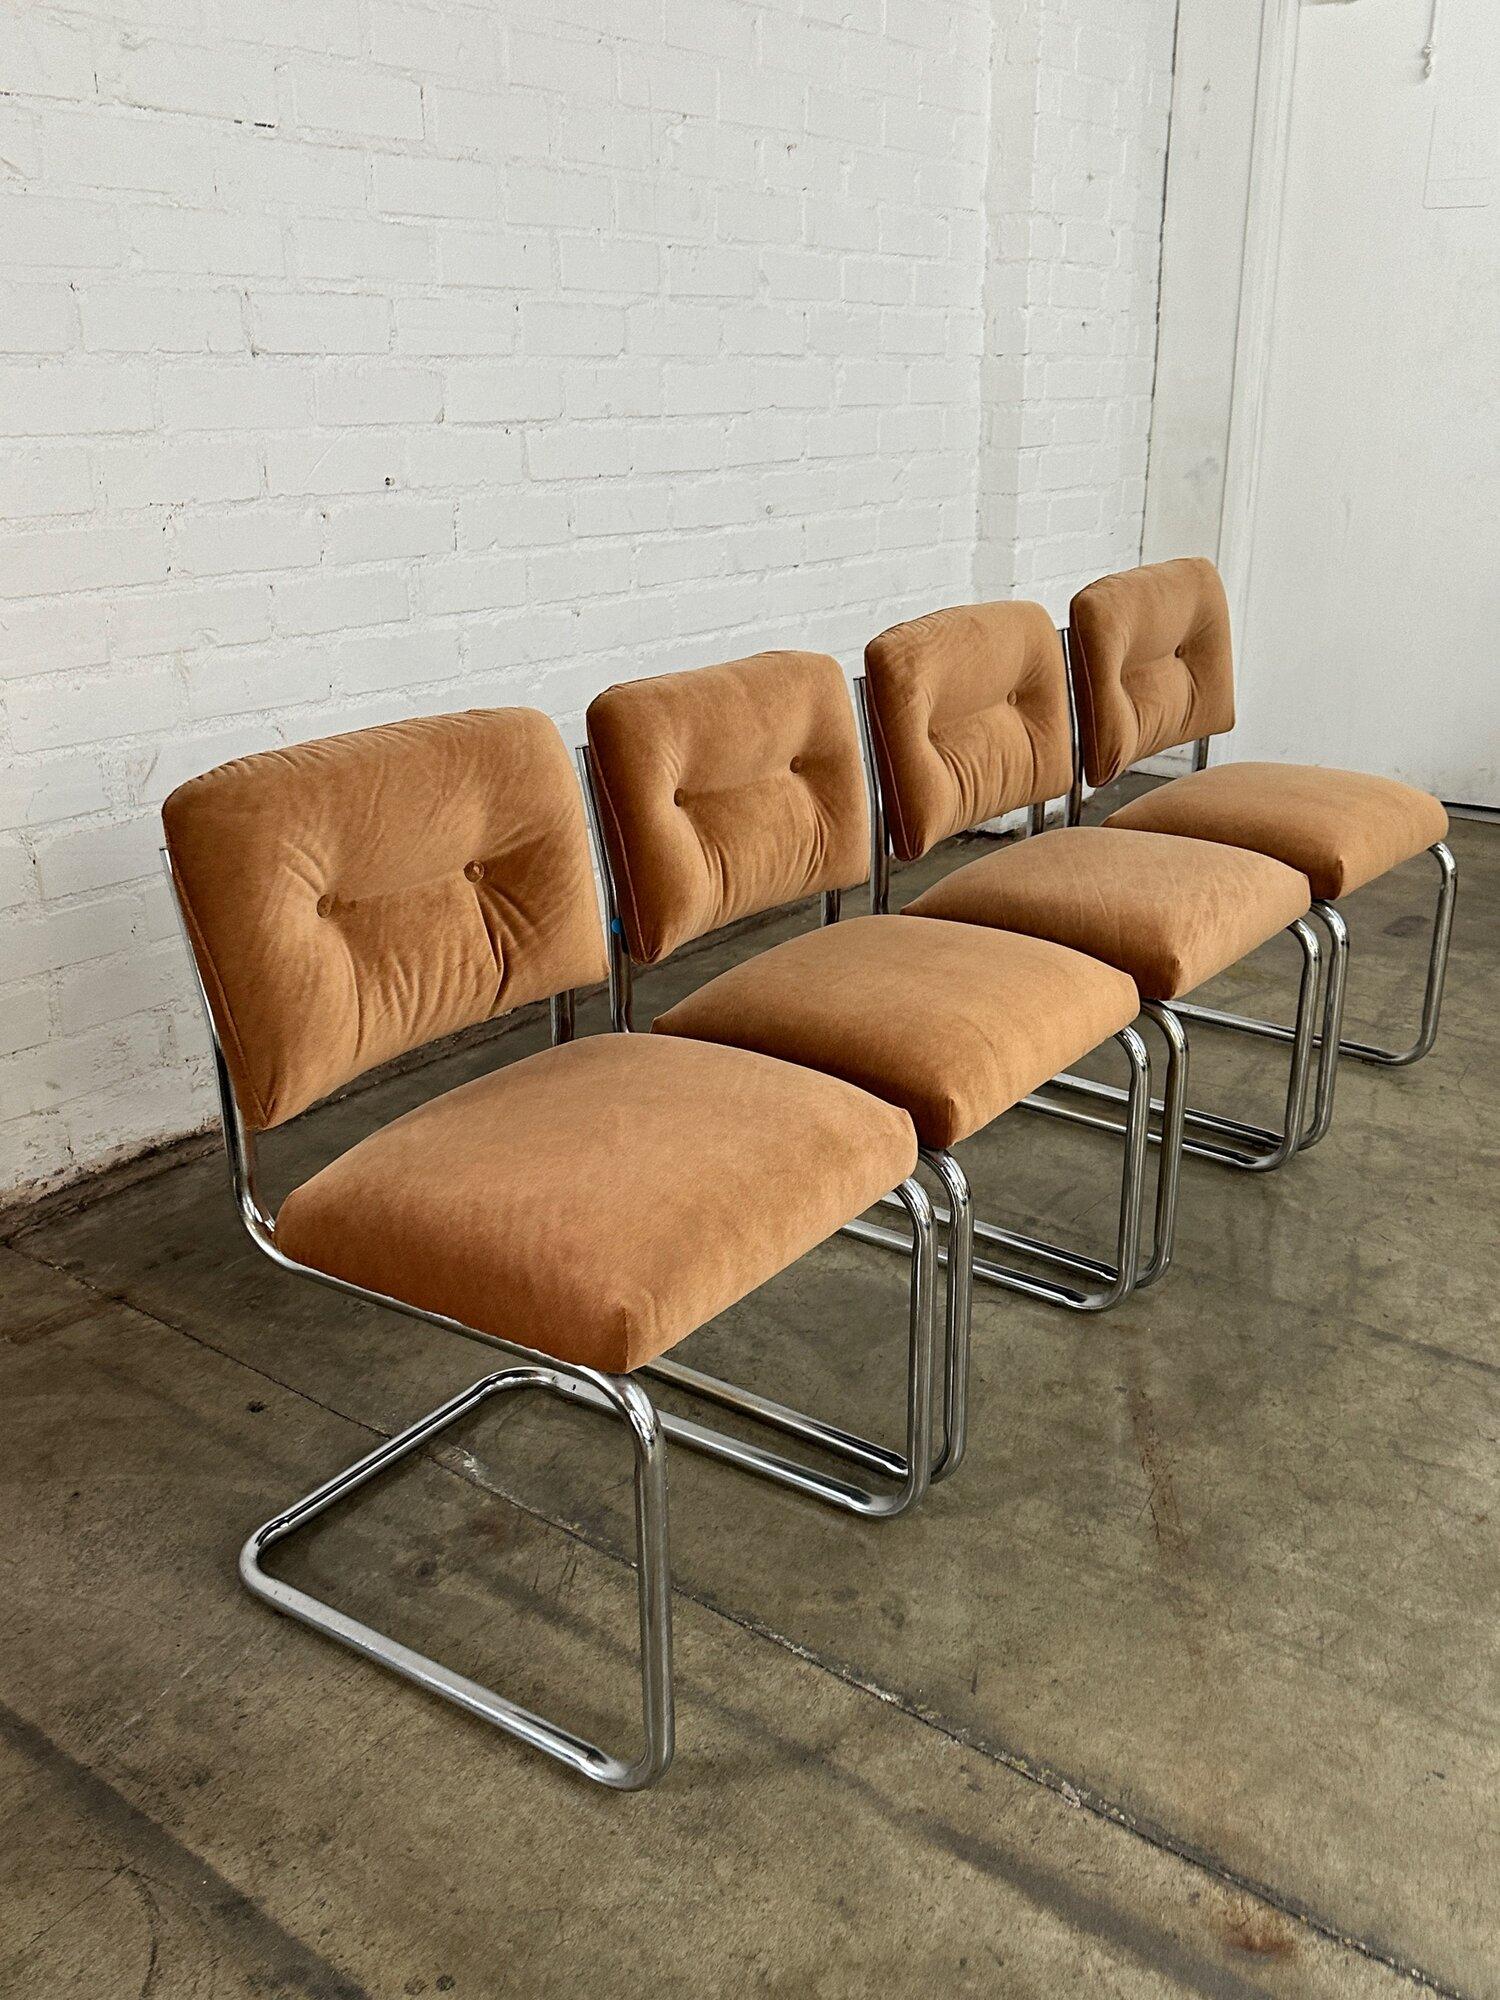 W18.5 D21 H32 SW17 SD15.5 SH18.5

Vintage chrome and velvet dining chairs. Chairs feature a great cantilever design adn show well with no major areas of wear. Chrome has been cleaned and polished. Mathcing dining table is available seprately see